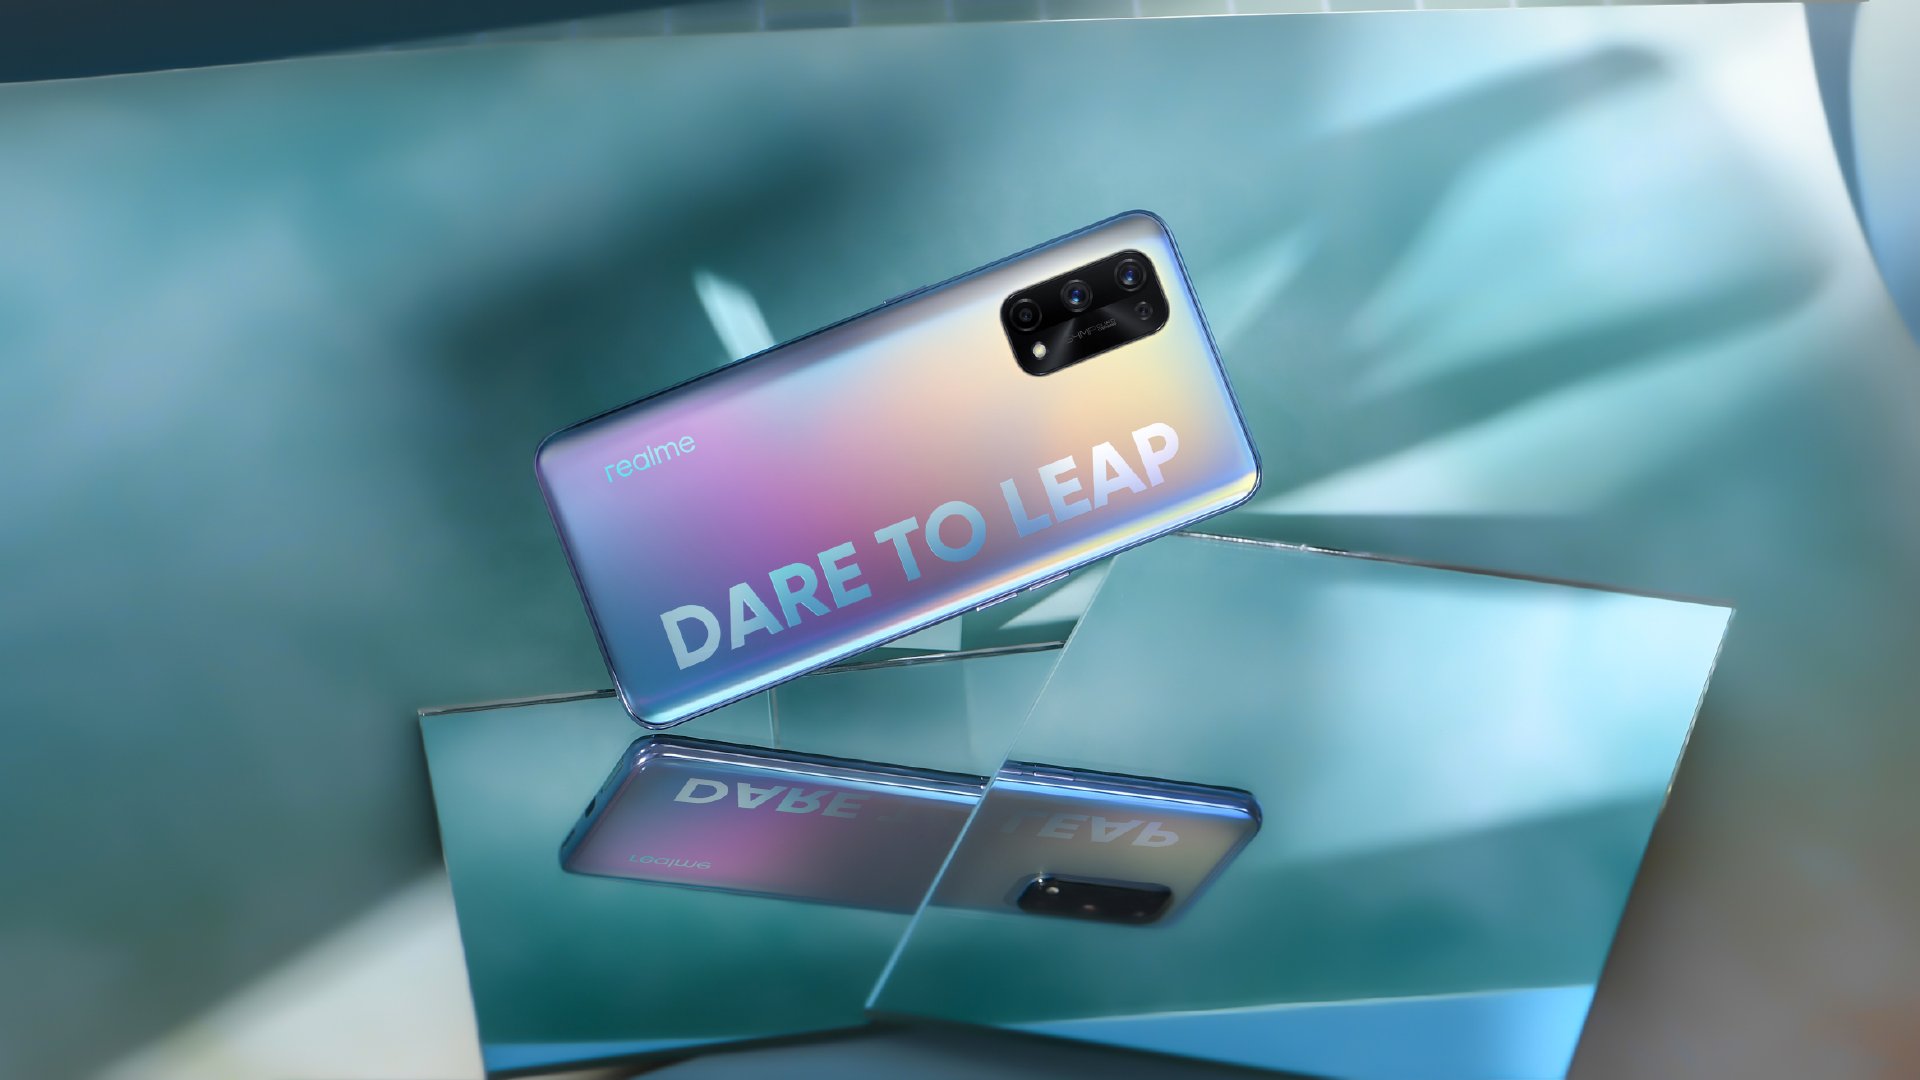 Realme executive teases a new flagship smartphone series powered by Snapdragon 875